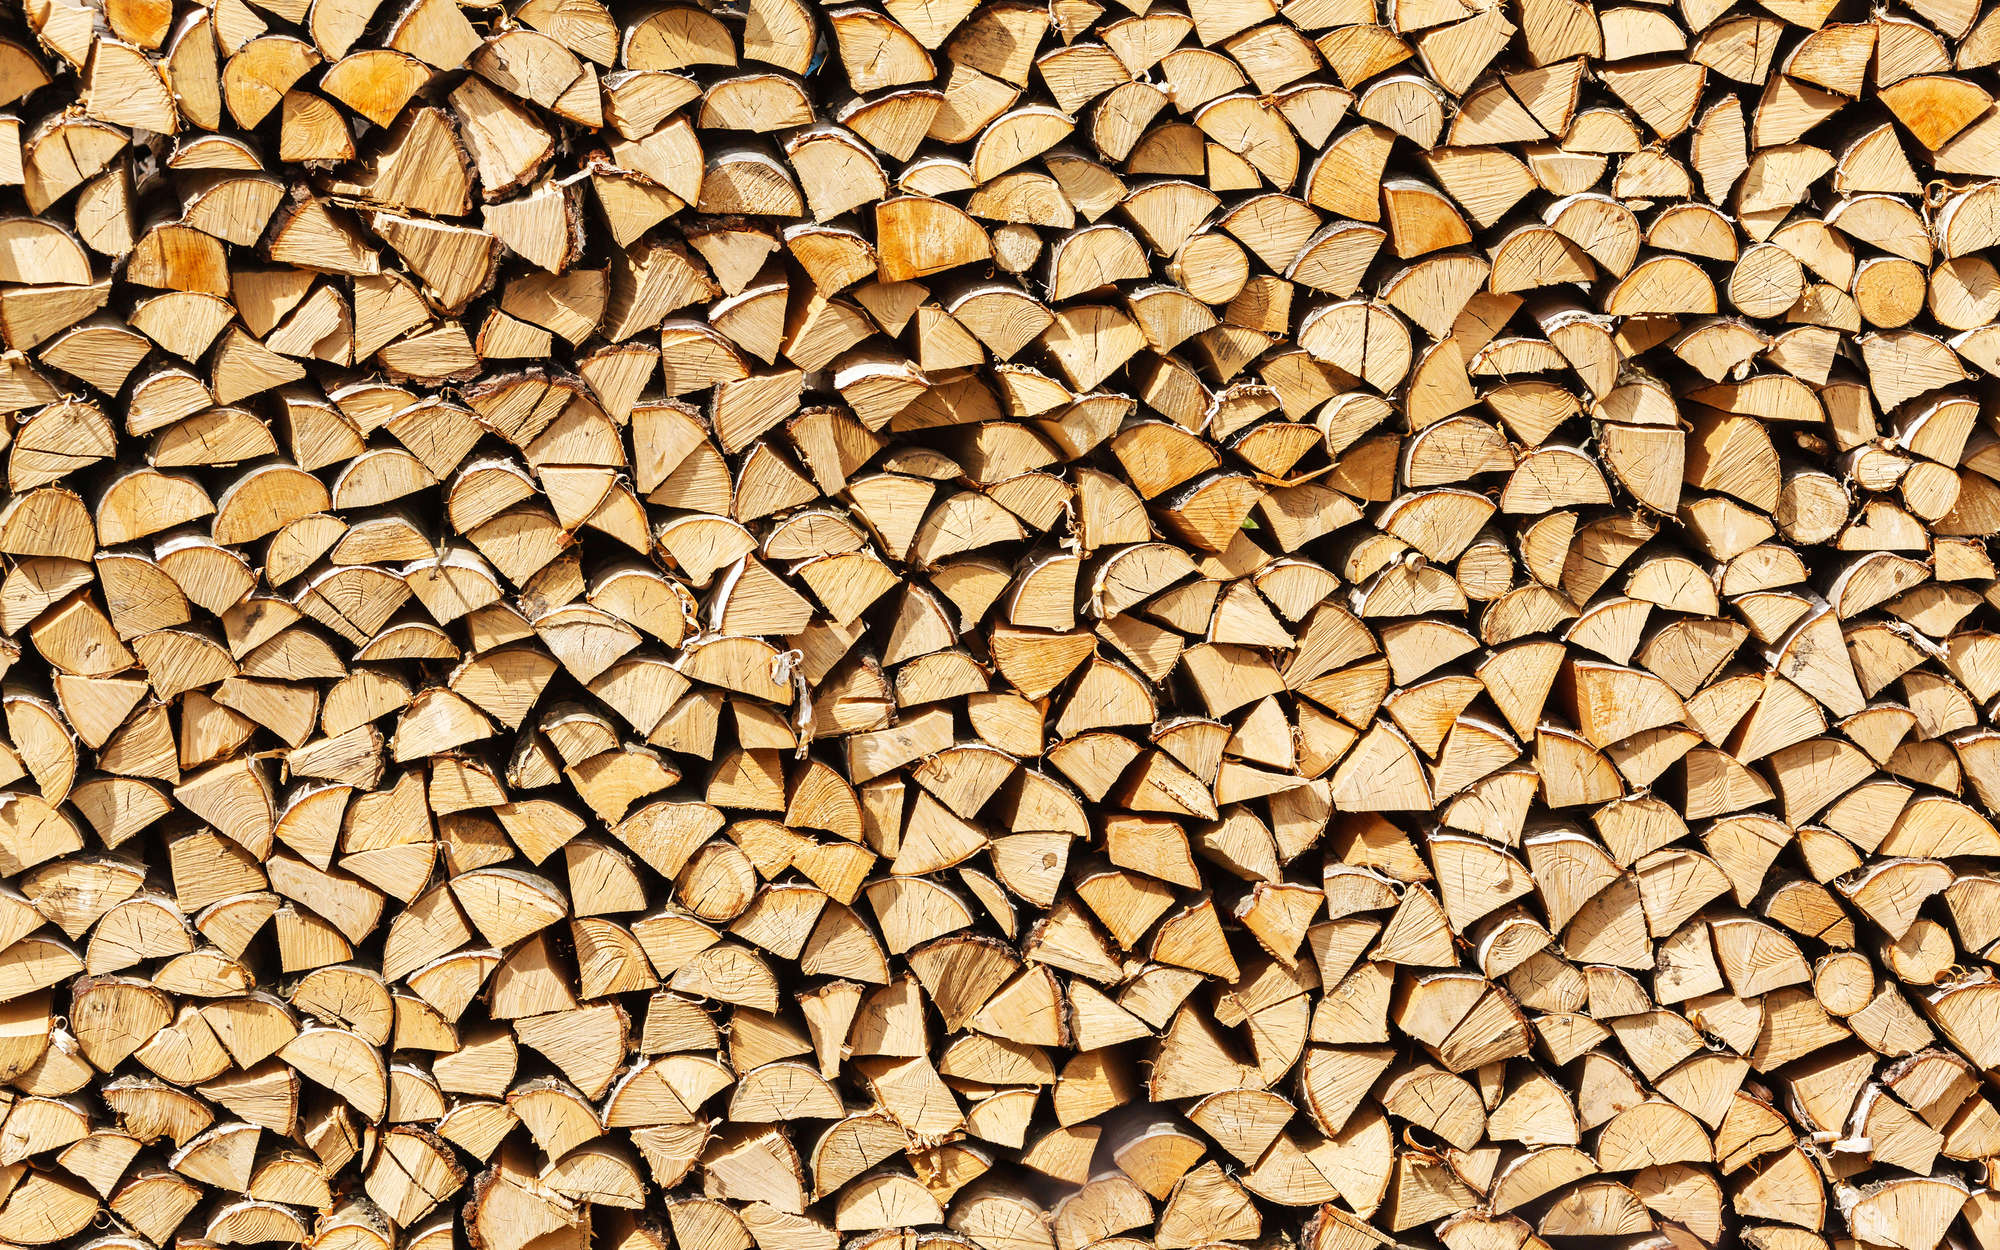             Photo wallpaper stacked firewood, firewood - Textured non-woven
        